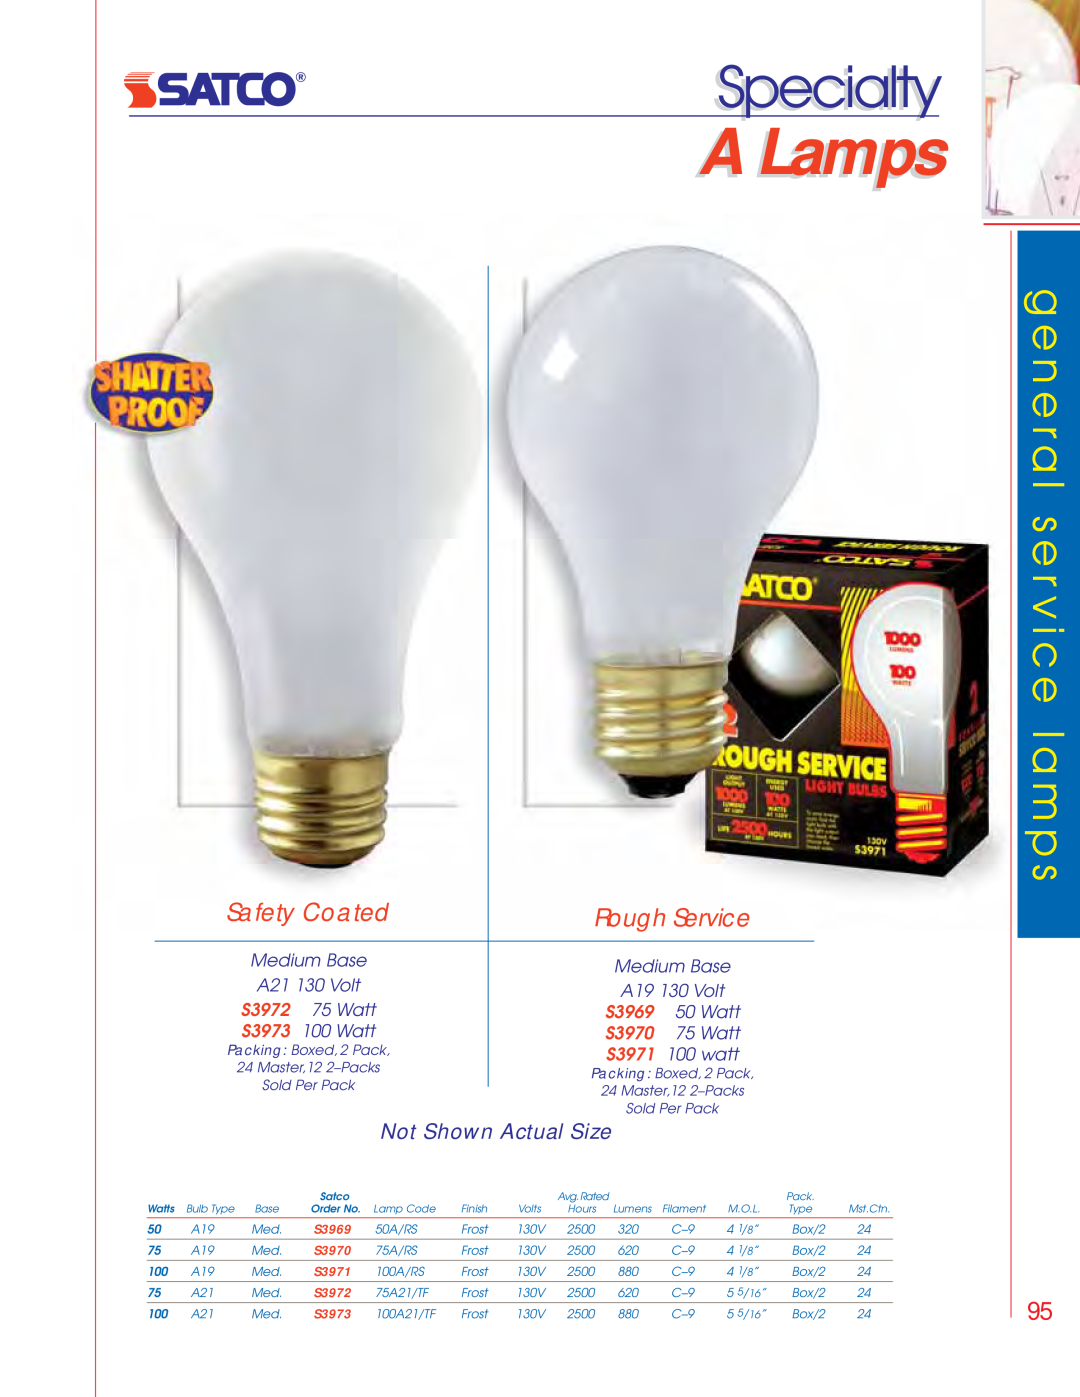 Satco Products S3680 A Lamps, Safety Coated, Rough Service, S3972, S3969, S3973, S3970, S3971, Specialtyi l, Sold Per Pack 